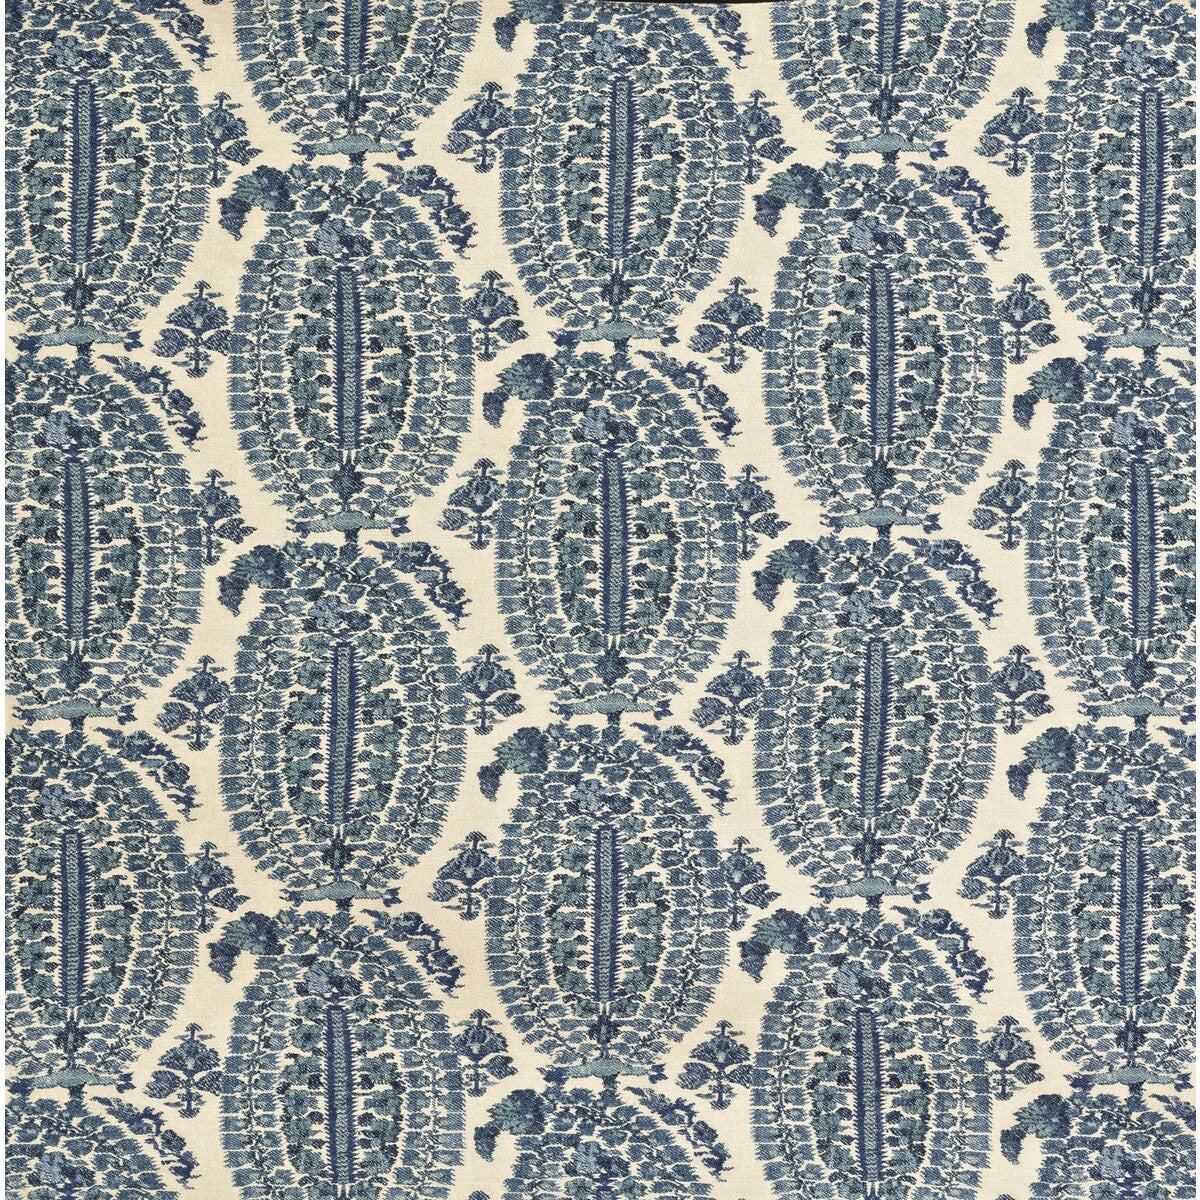 Anoushka fabric in blue color - pattern BFC-3660.5.0 - by Lee Jofa in the Blithfield collection